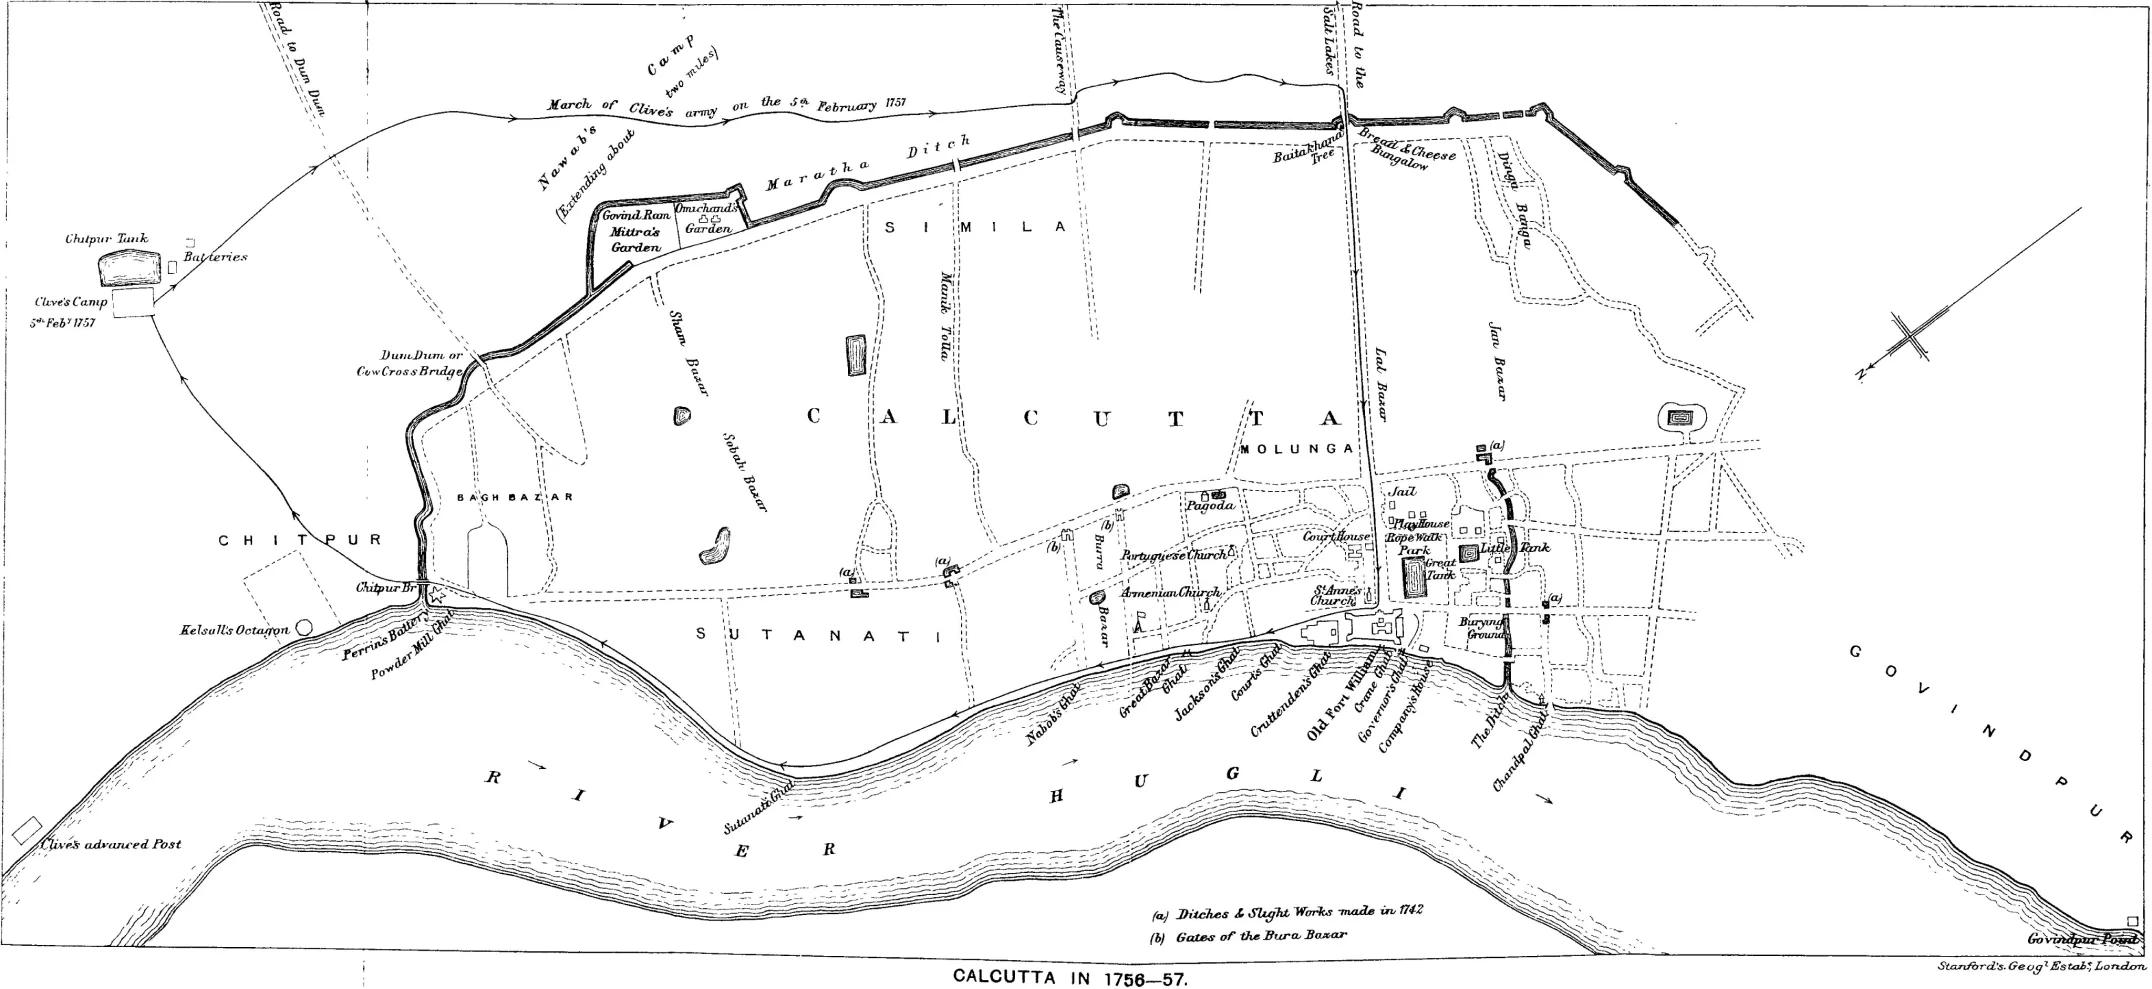 Map of Calcutta, 1756-57  (Source: H.E. Busteed, Echoes front Old Calcutta: 1908 (4th edition); https://commons.wikimedia.org/wiki File:Echoes_from_Old_Calcutta_028.tif#metadata).